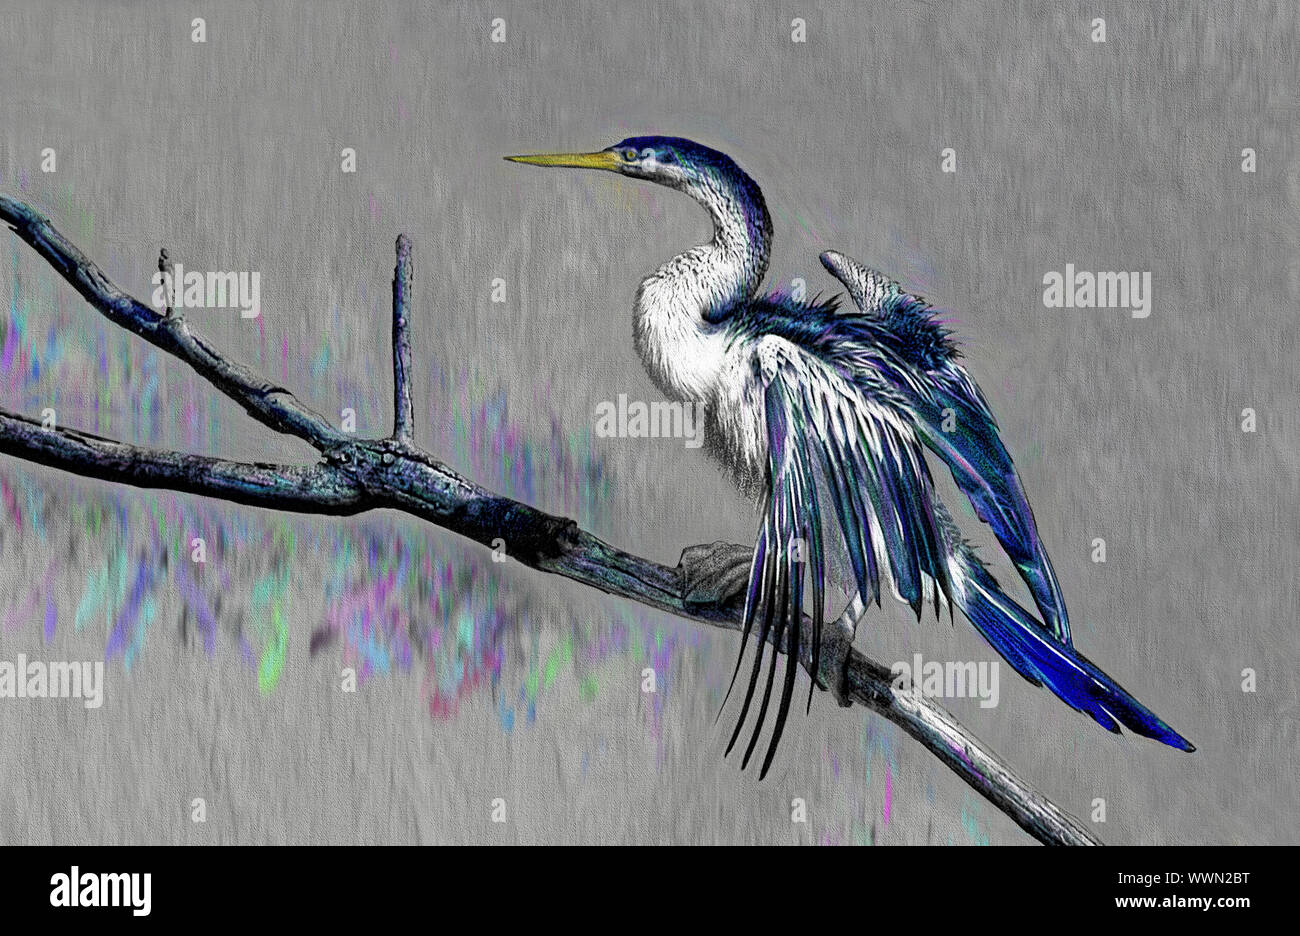 A photographic image of a large bird on a tree branch which has been enhanced and coloured to produce an artistic study on a grey background Stock Photo